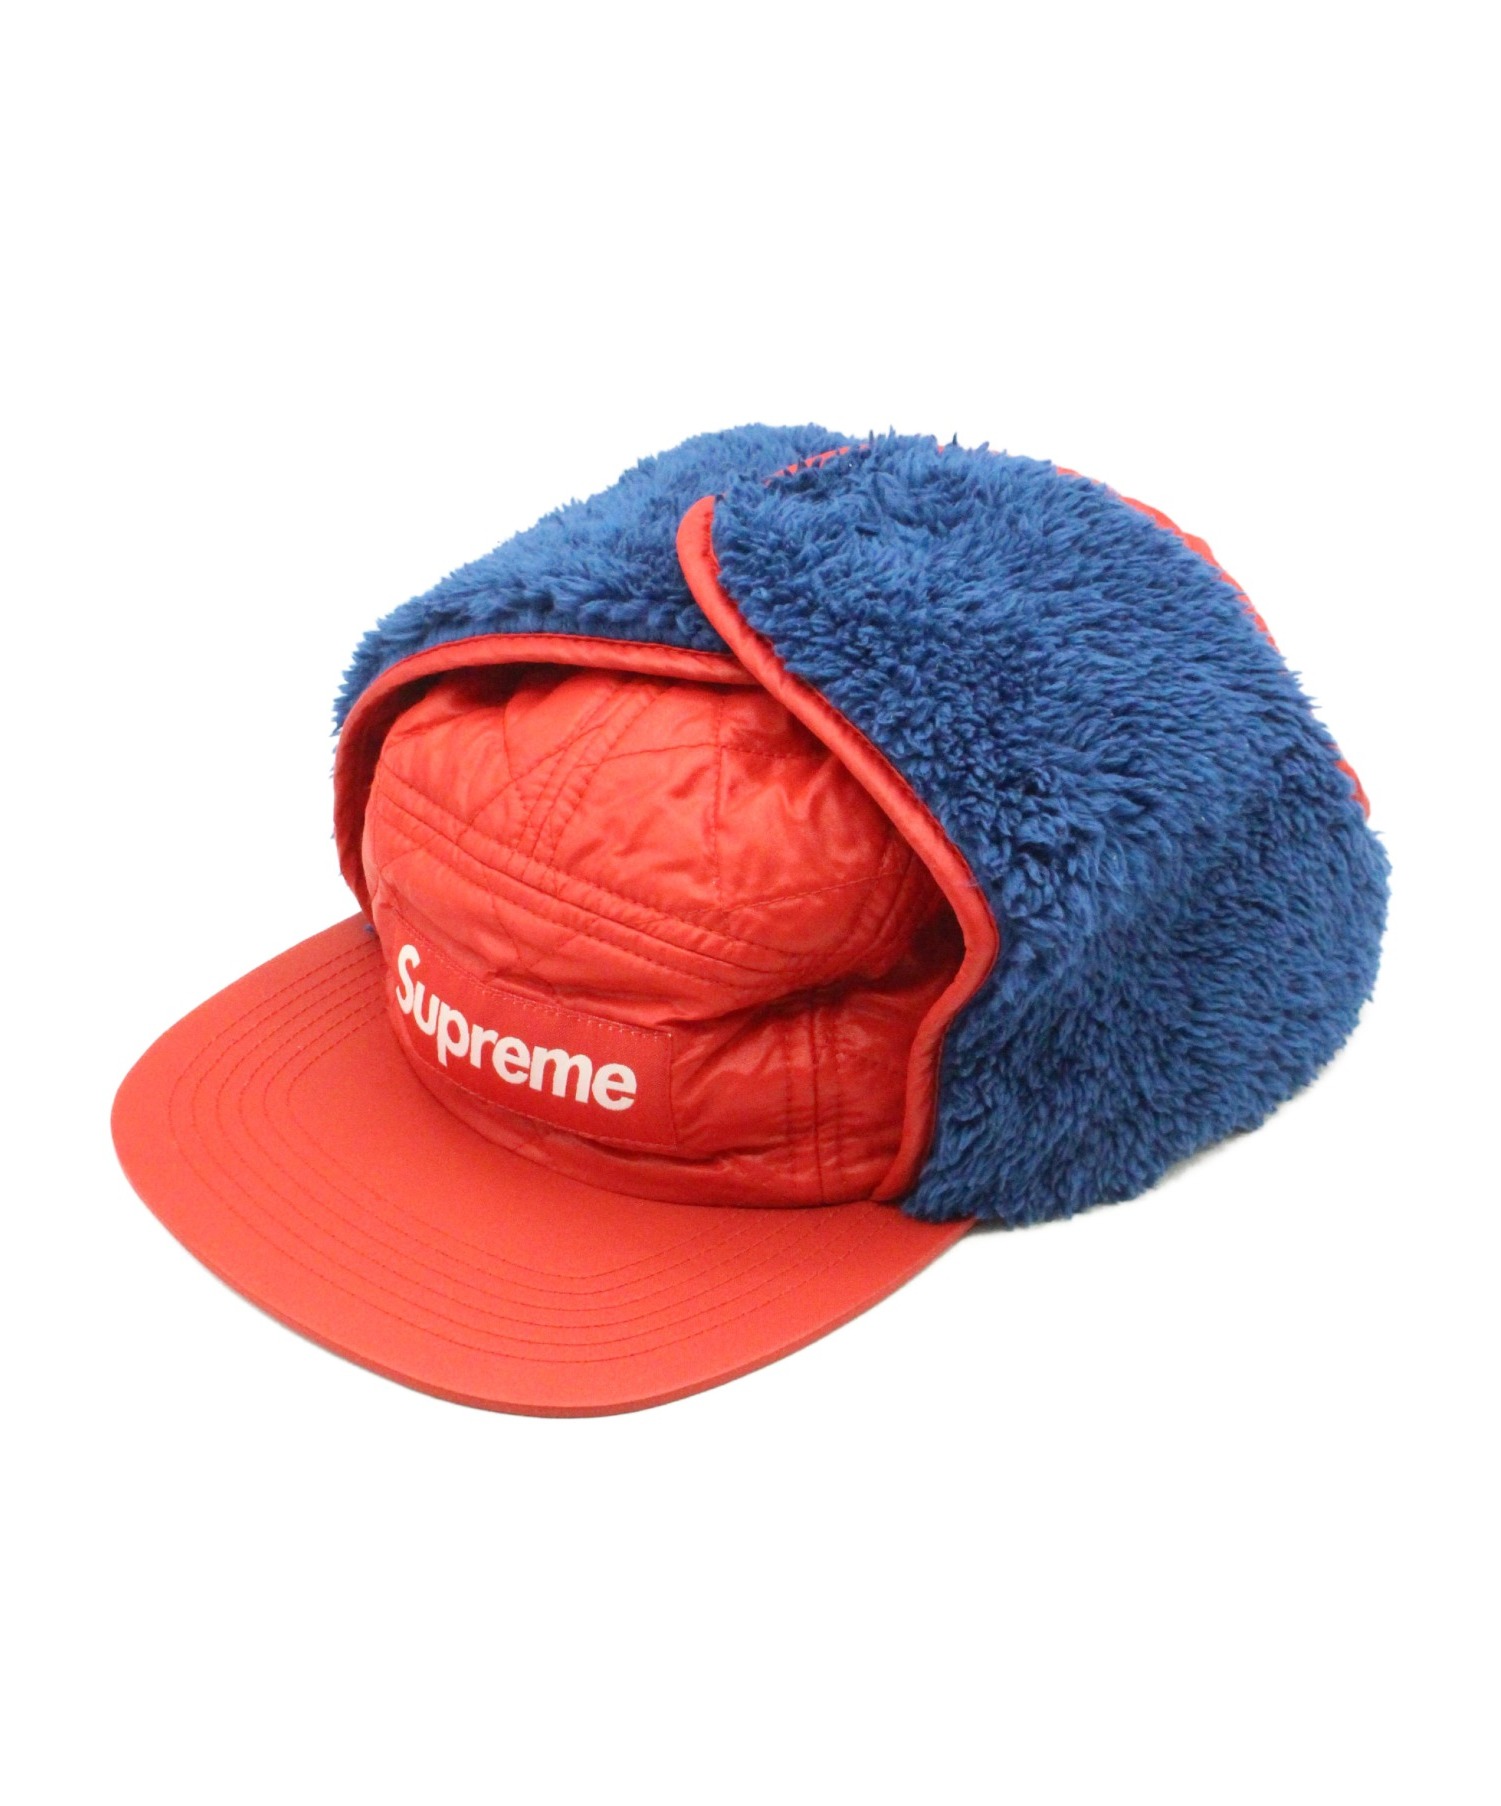 Supreme (シュプリーム) Quilted Earflap Camp Cap レッド サイズ:-